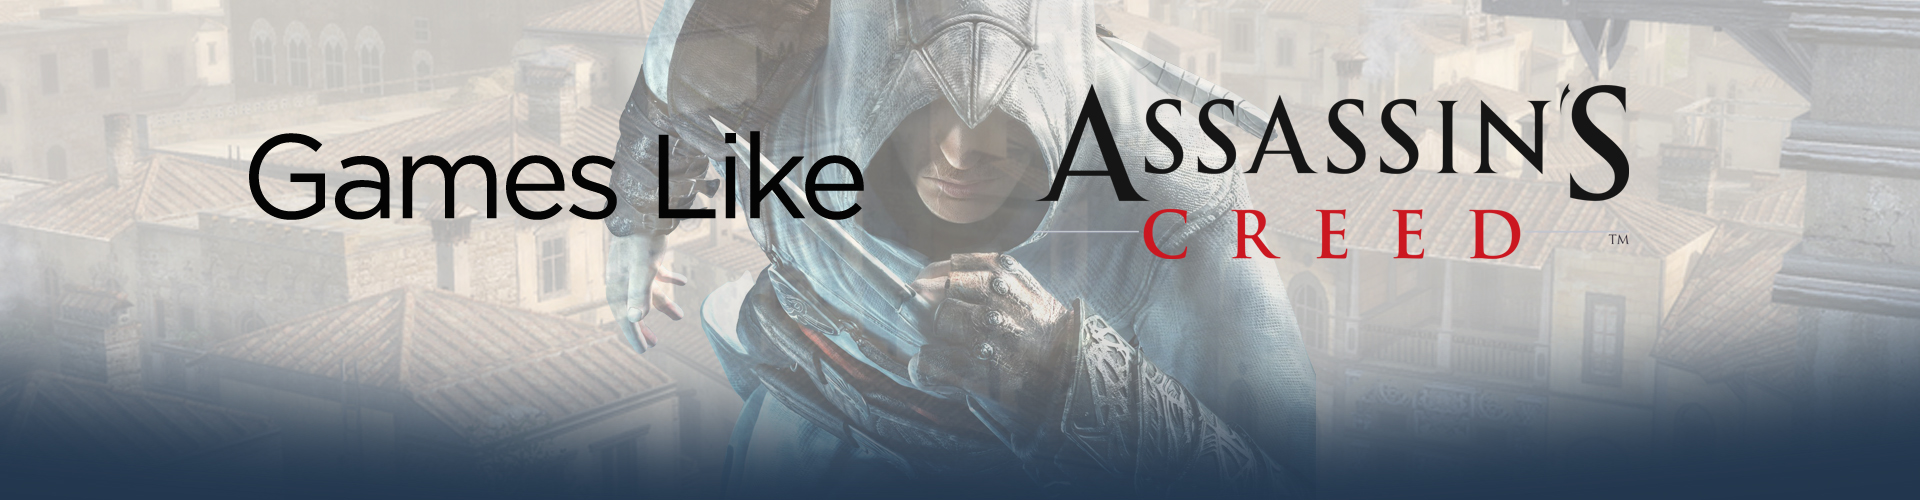 Games Like Assassin's Creed